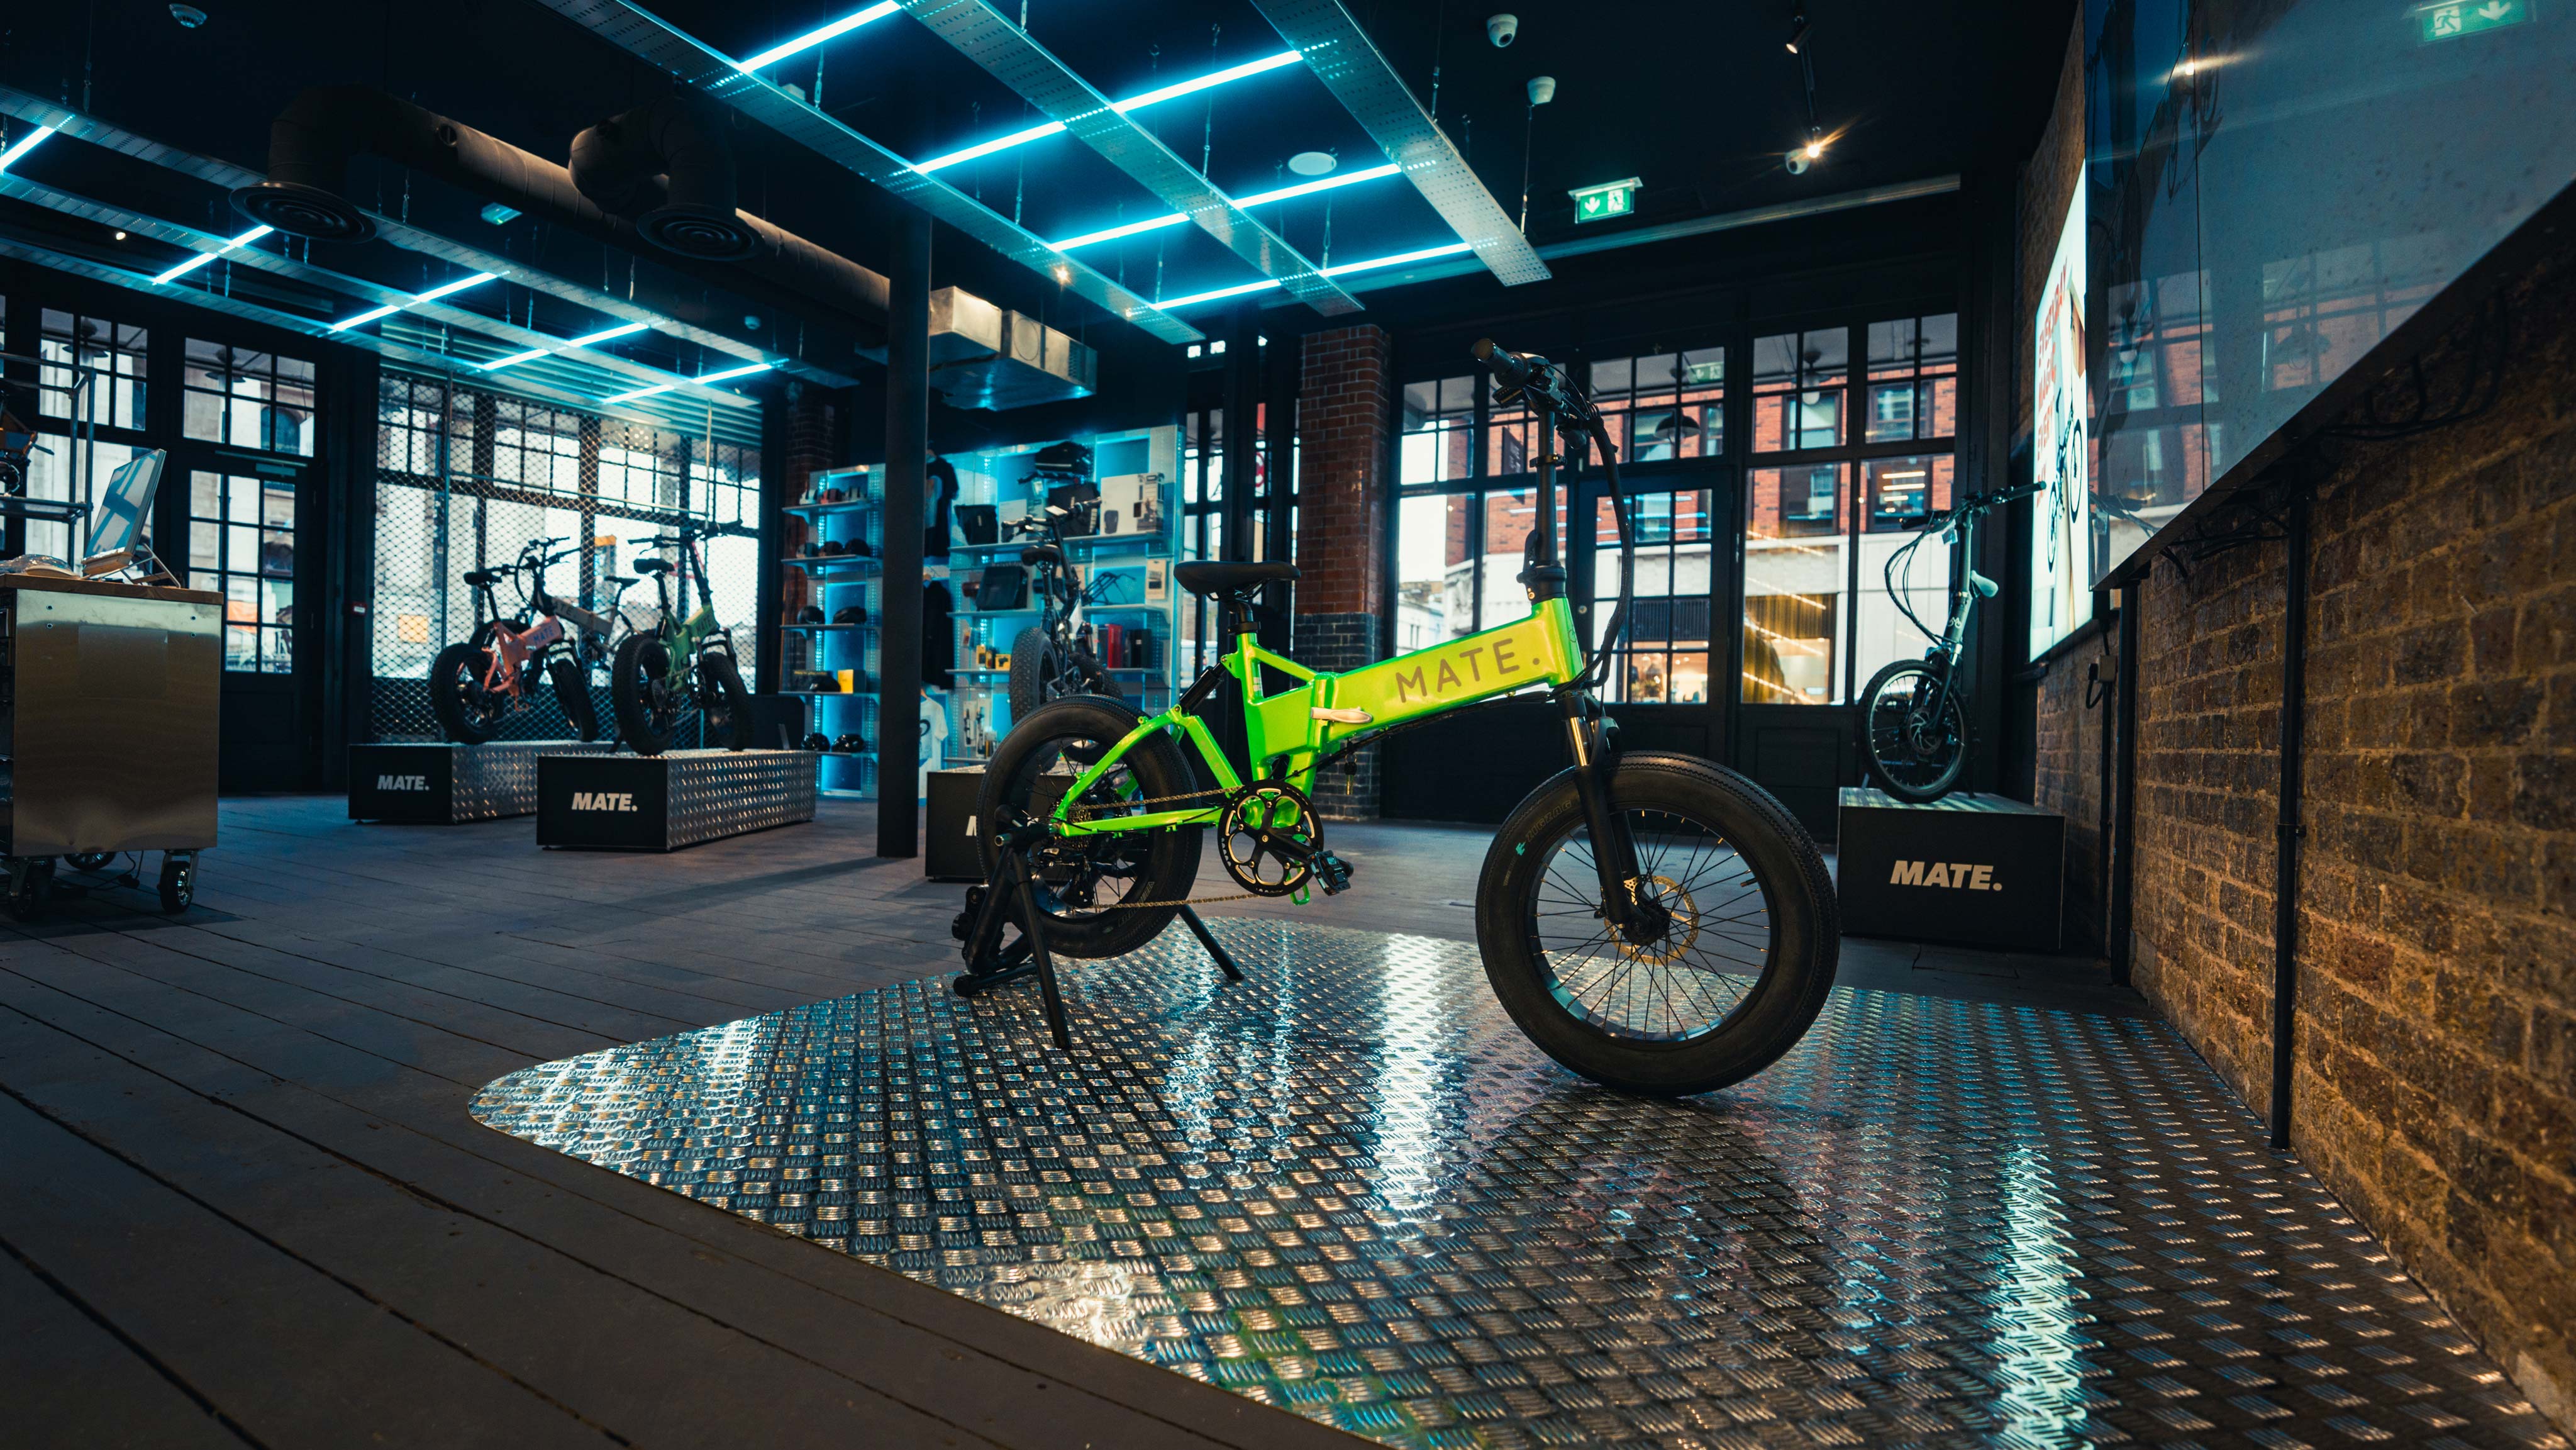 MATE bicycle - interior retail design and installation - Attero Retail Design Agency